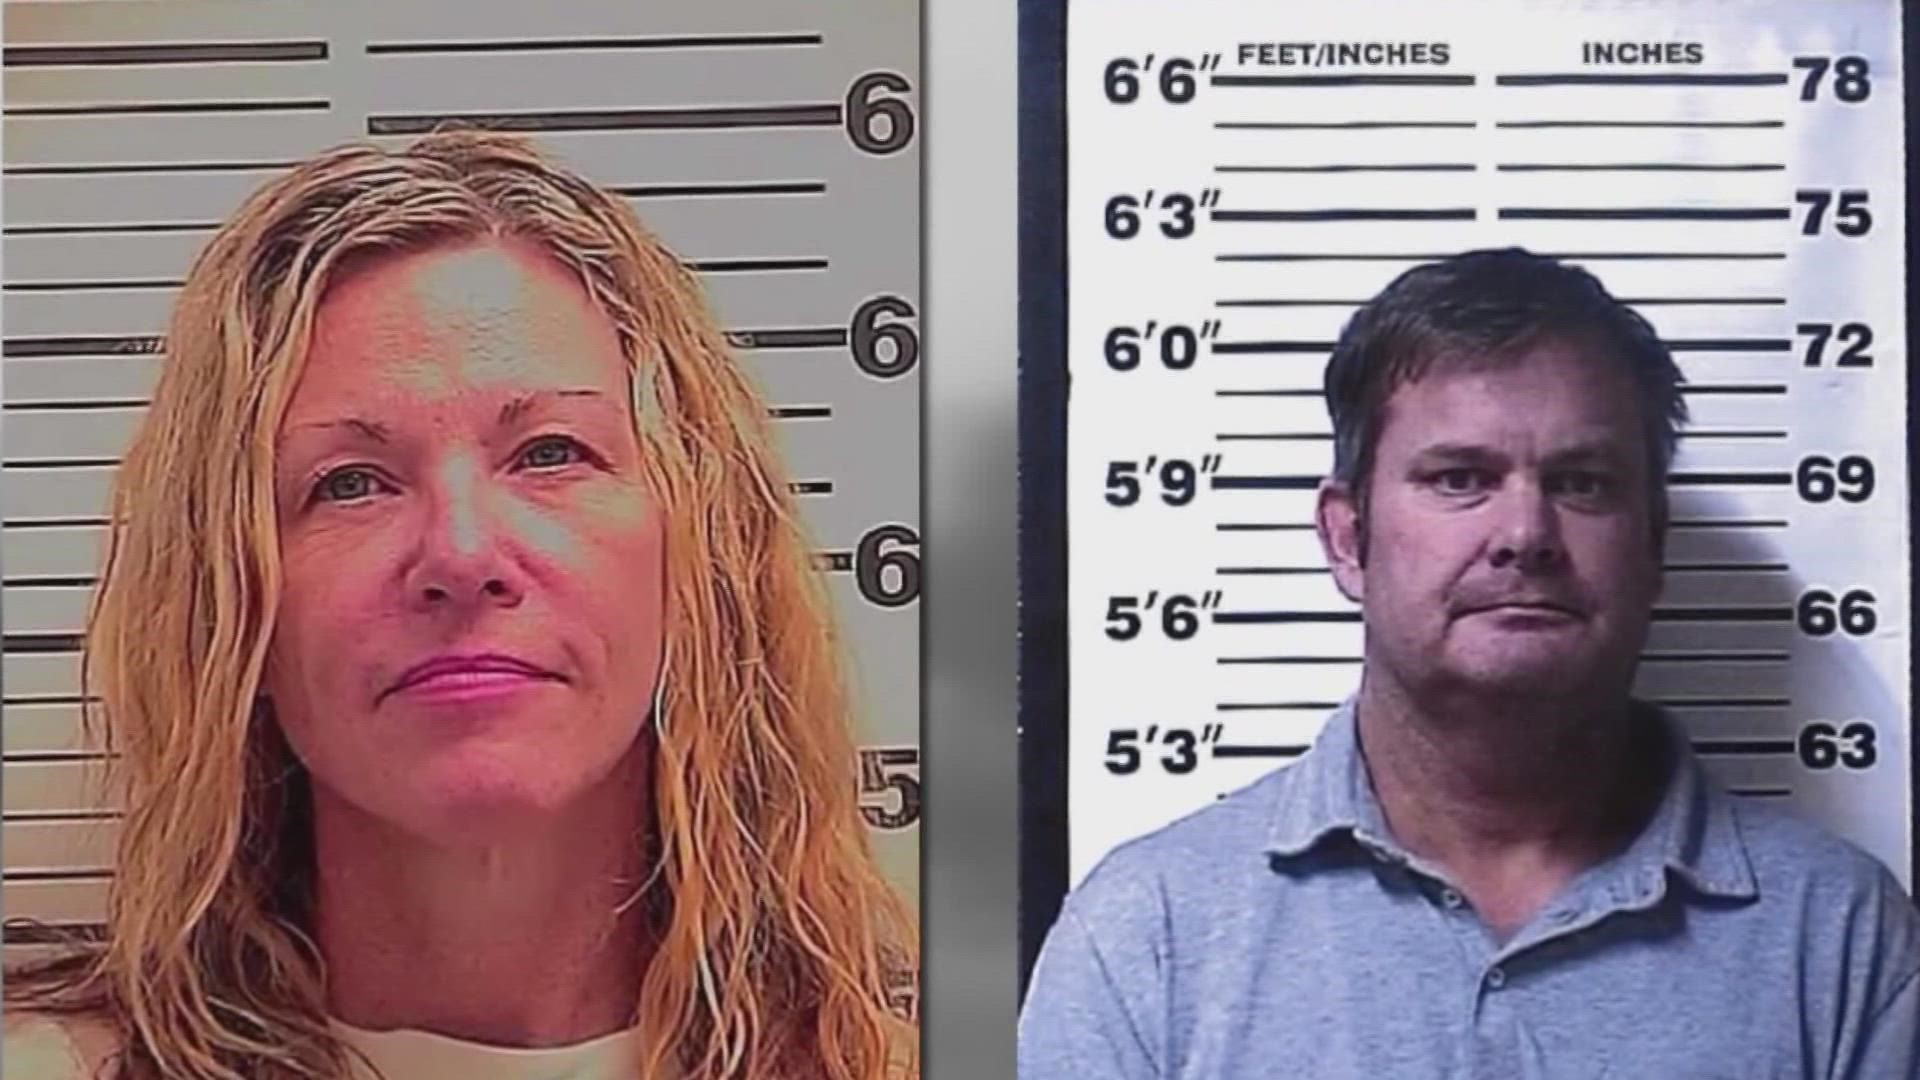 Lori Vallow Daybell and her new husband Chad Daybell are accused of conspiring together to kill her two children and his late wife.